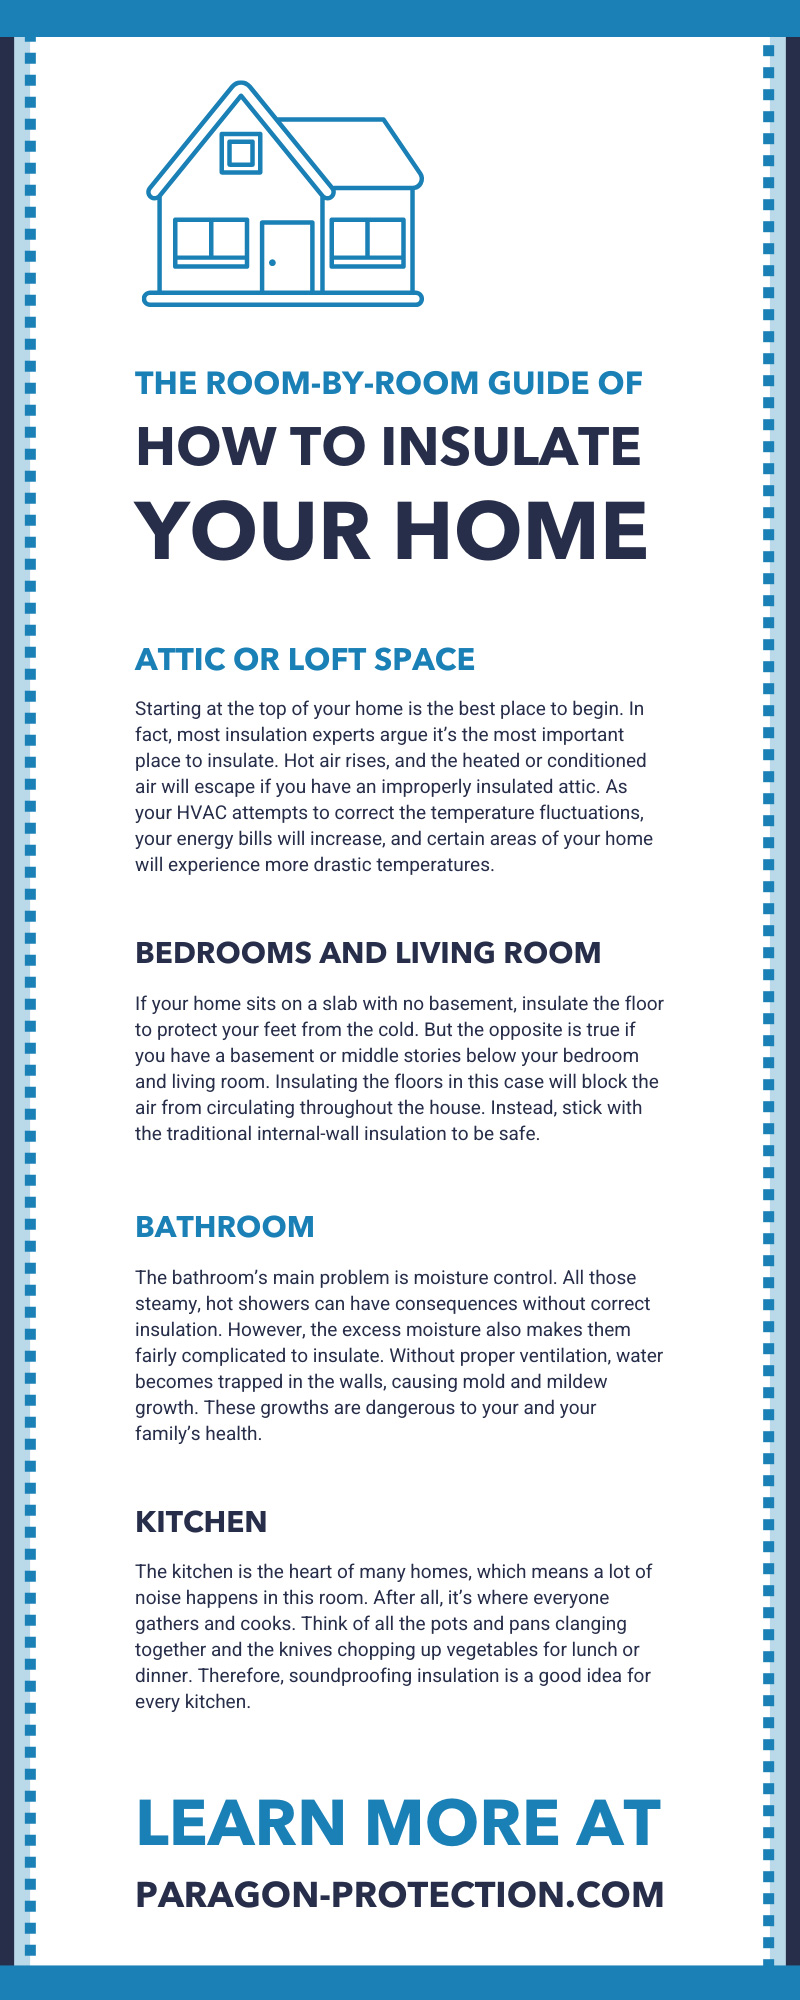 The Room-by-Room Guide of How To Insulate Your Home